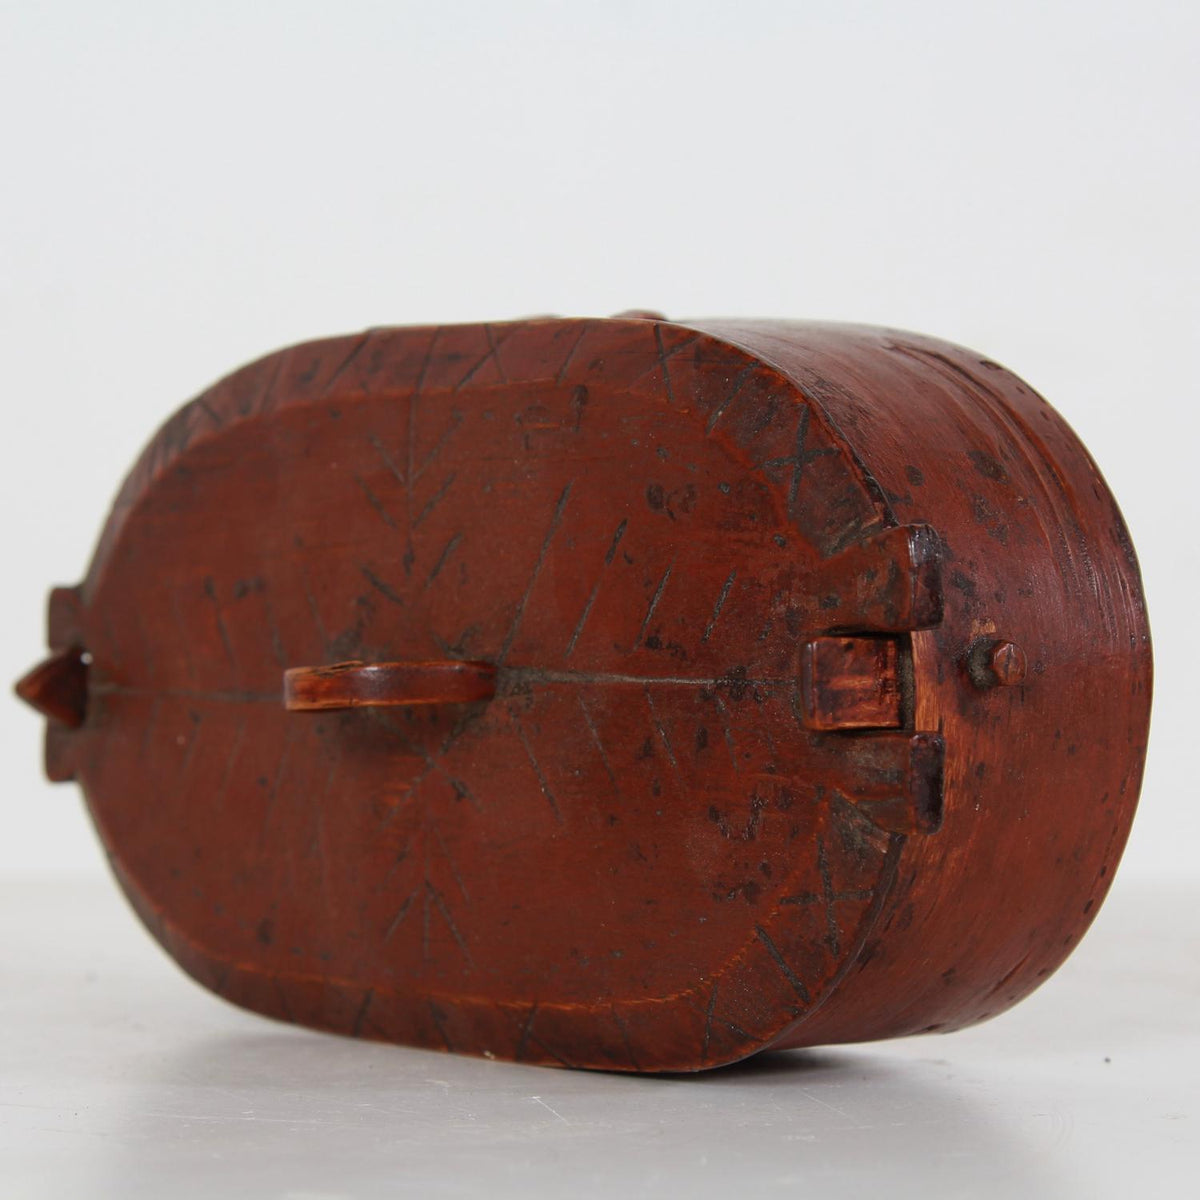 A VERY CHARMING SWEDISH 19THC BENTWOOD BOX IN ORIGINAL RED PAINT